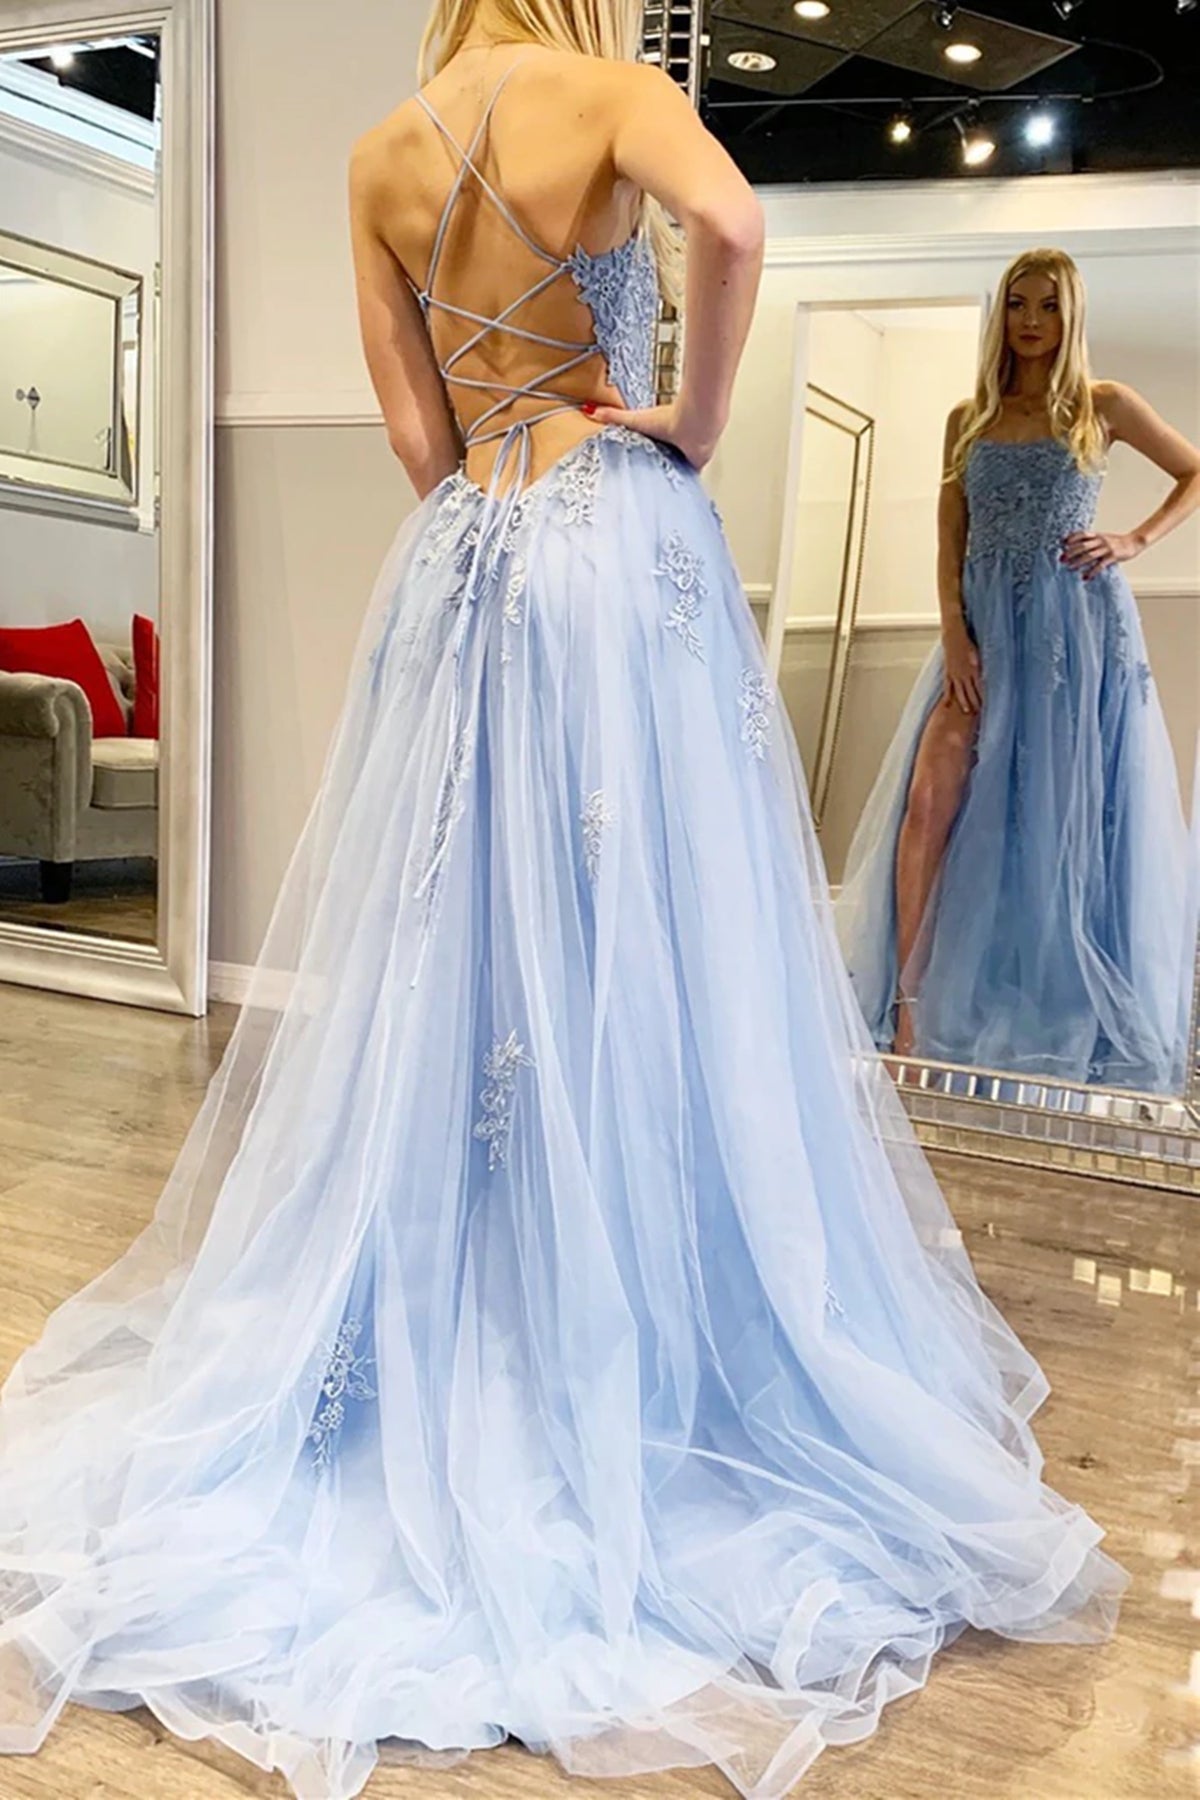 Fashion Criss-Cross Back Light Blue Lace Long Prom Dresses with High Slit, Backless Light Blue Lace Floral Formal Evening Dresses 